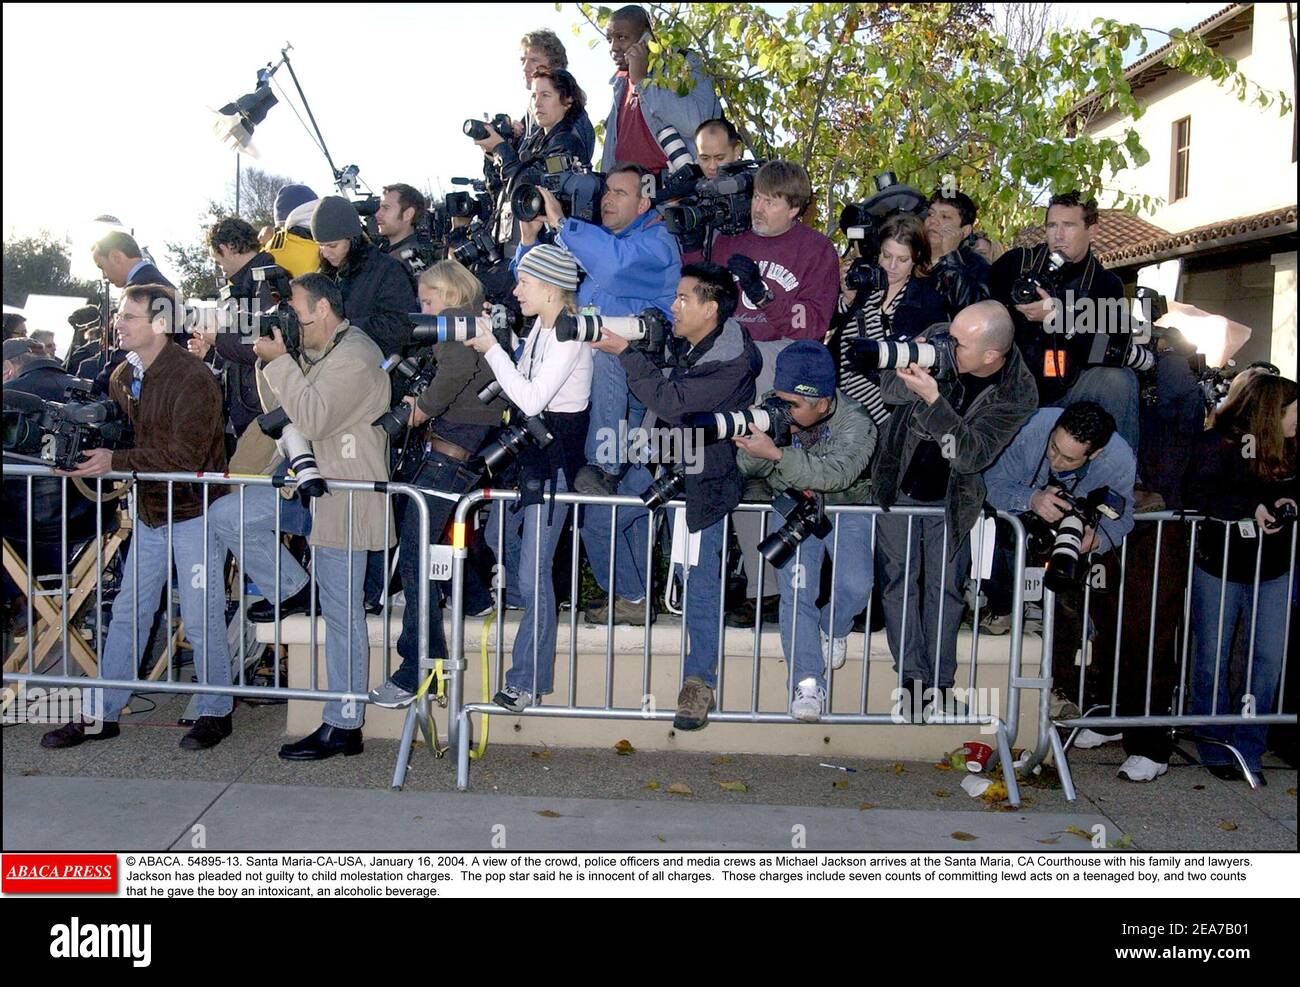 © ABACA. 54895-13. Santa Maria-CA-USA, January 16, 2004. A view of the crowd, police officers and media crews as Michael Jackson arrives at the Santa Maria, CA Courthouse with his family and lawyers. Jackson has pleaded not guilty to child molestation charges. The pop star said he is innocent of all charges. Those charges include seven counts of committing lewd acts on a teenaged boy, and two counts that he gave the boy an intoxicant, an alcoholic beverage. Stock Photo